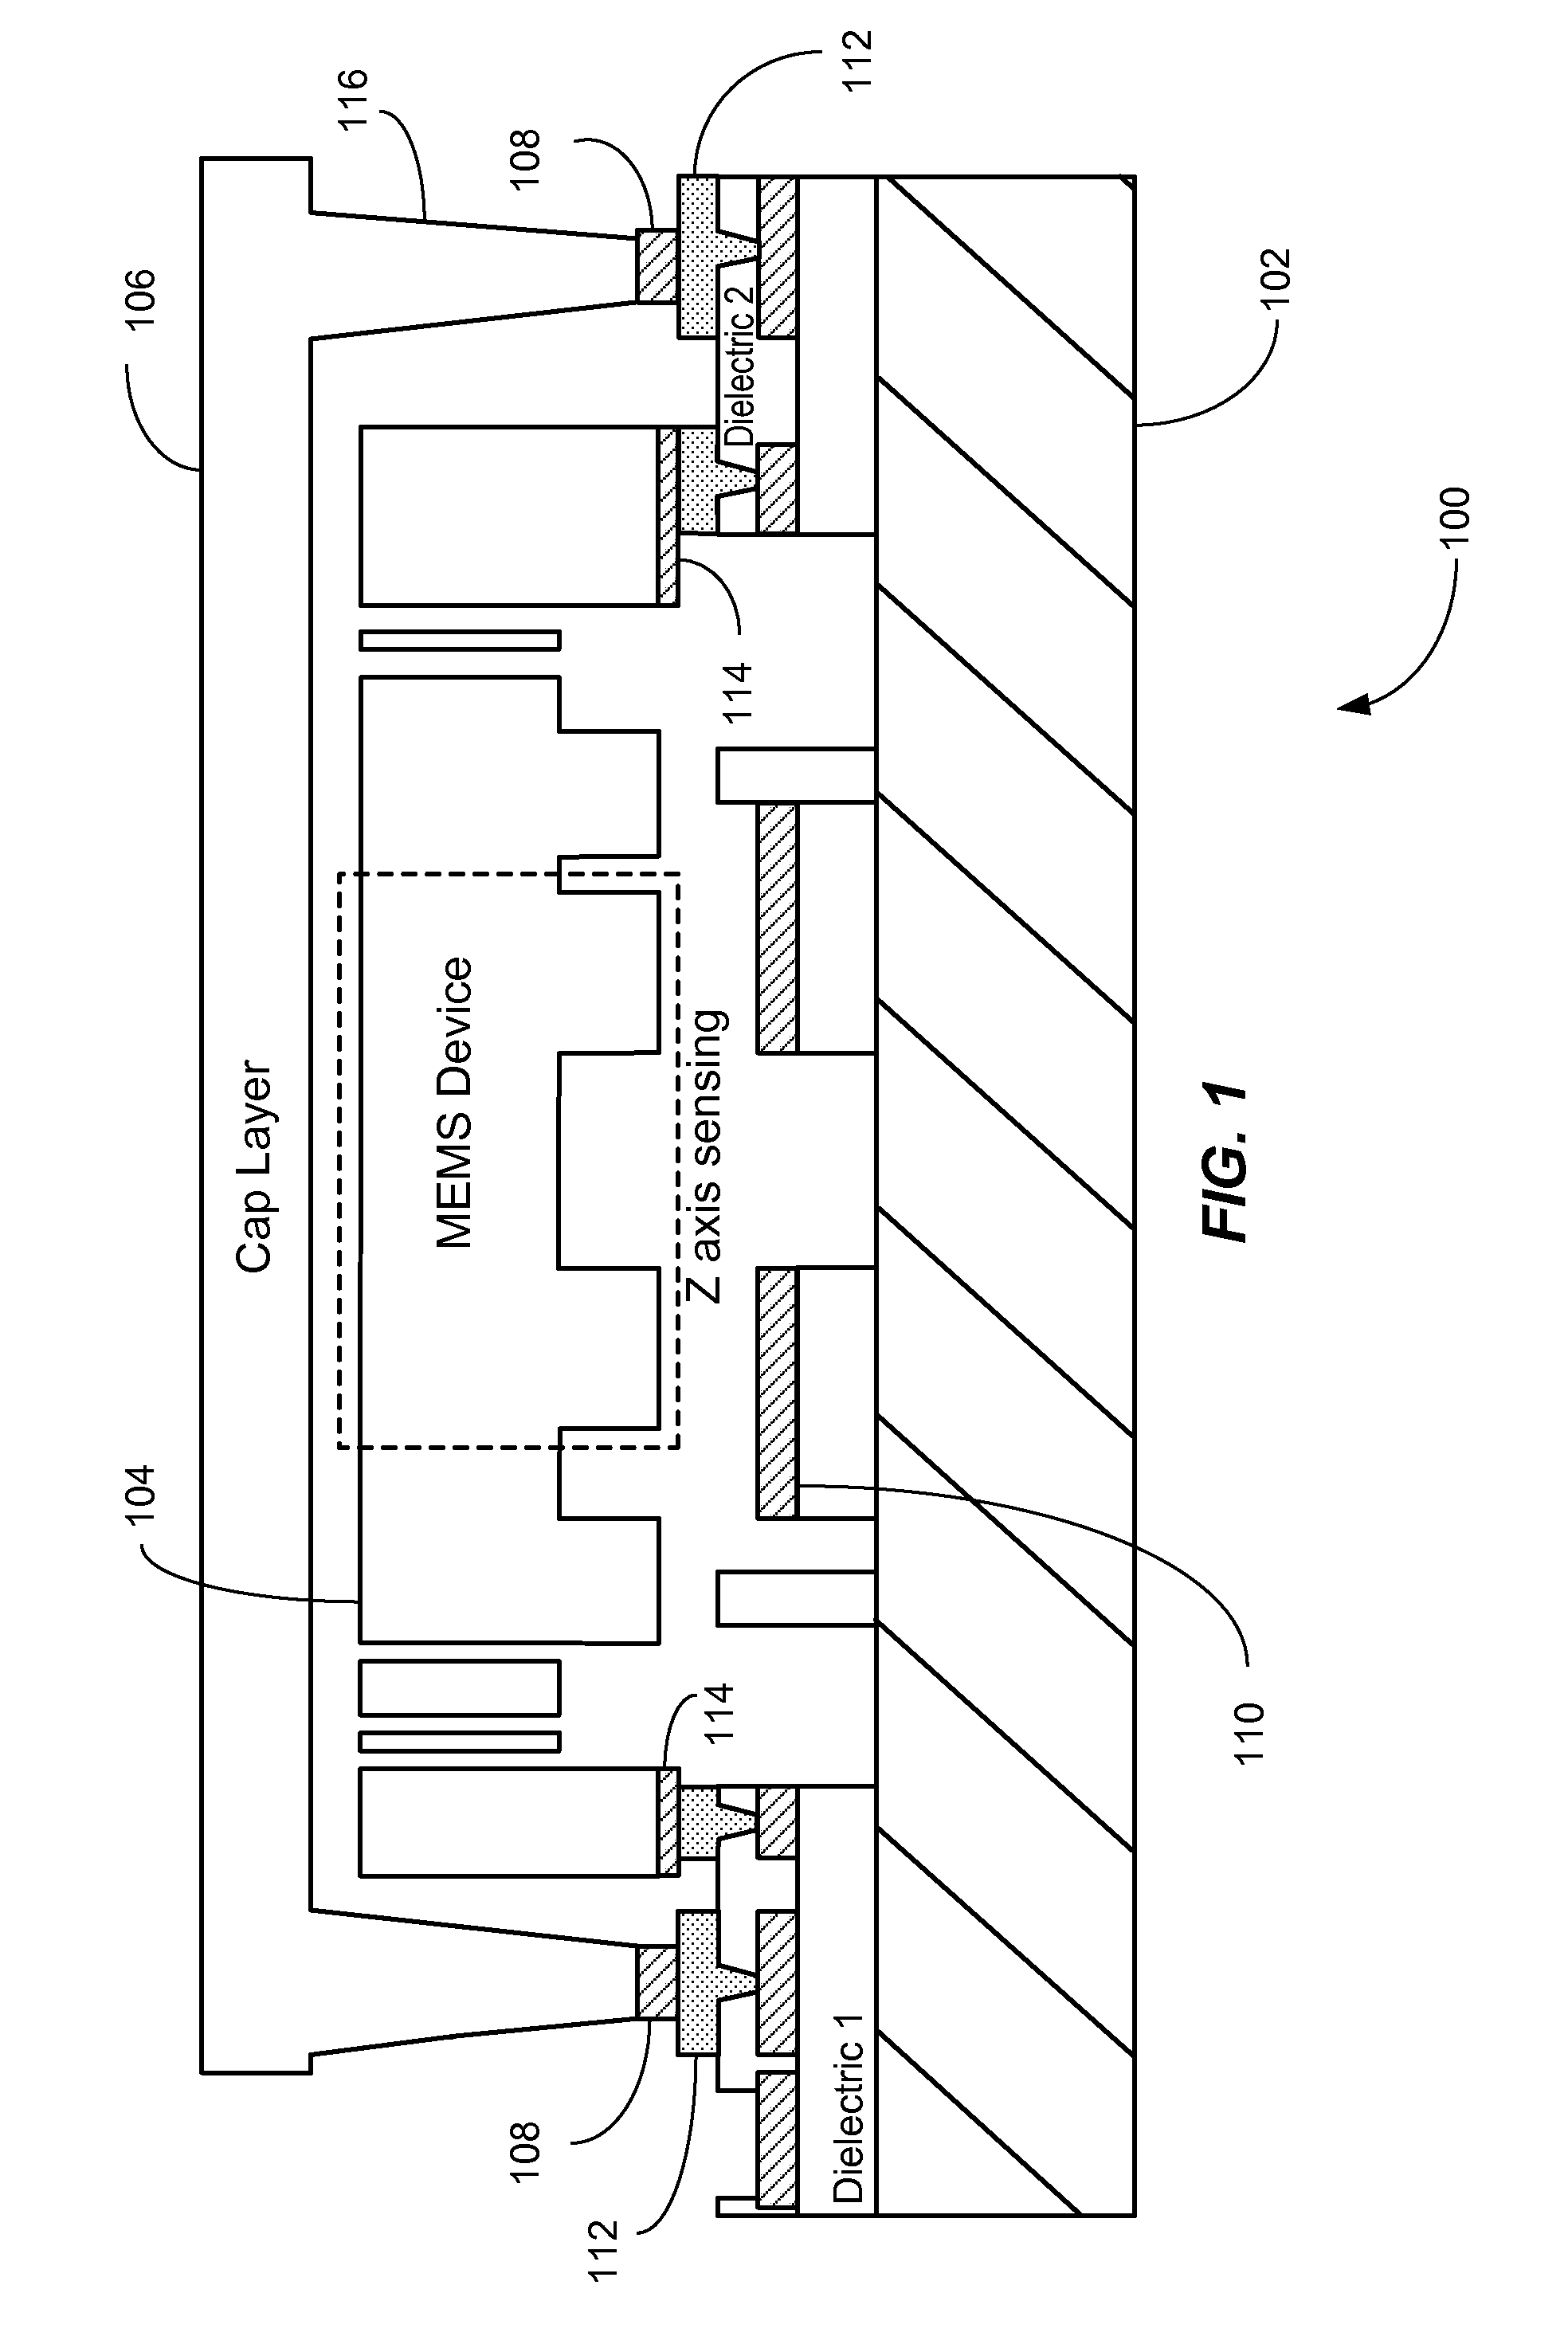 Method and system for MEMS devices